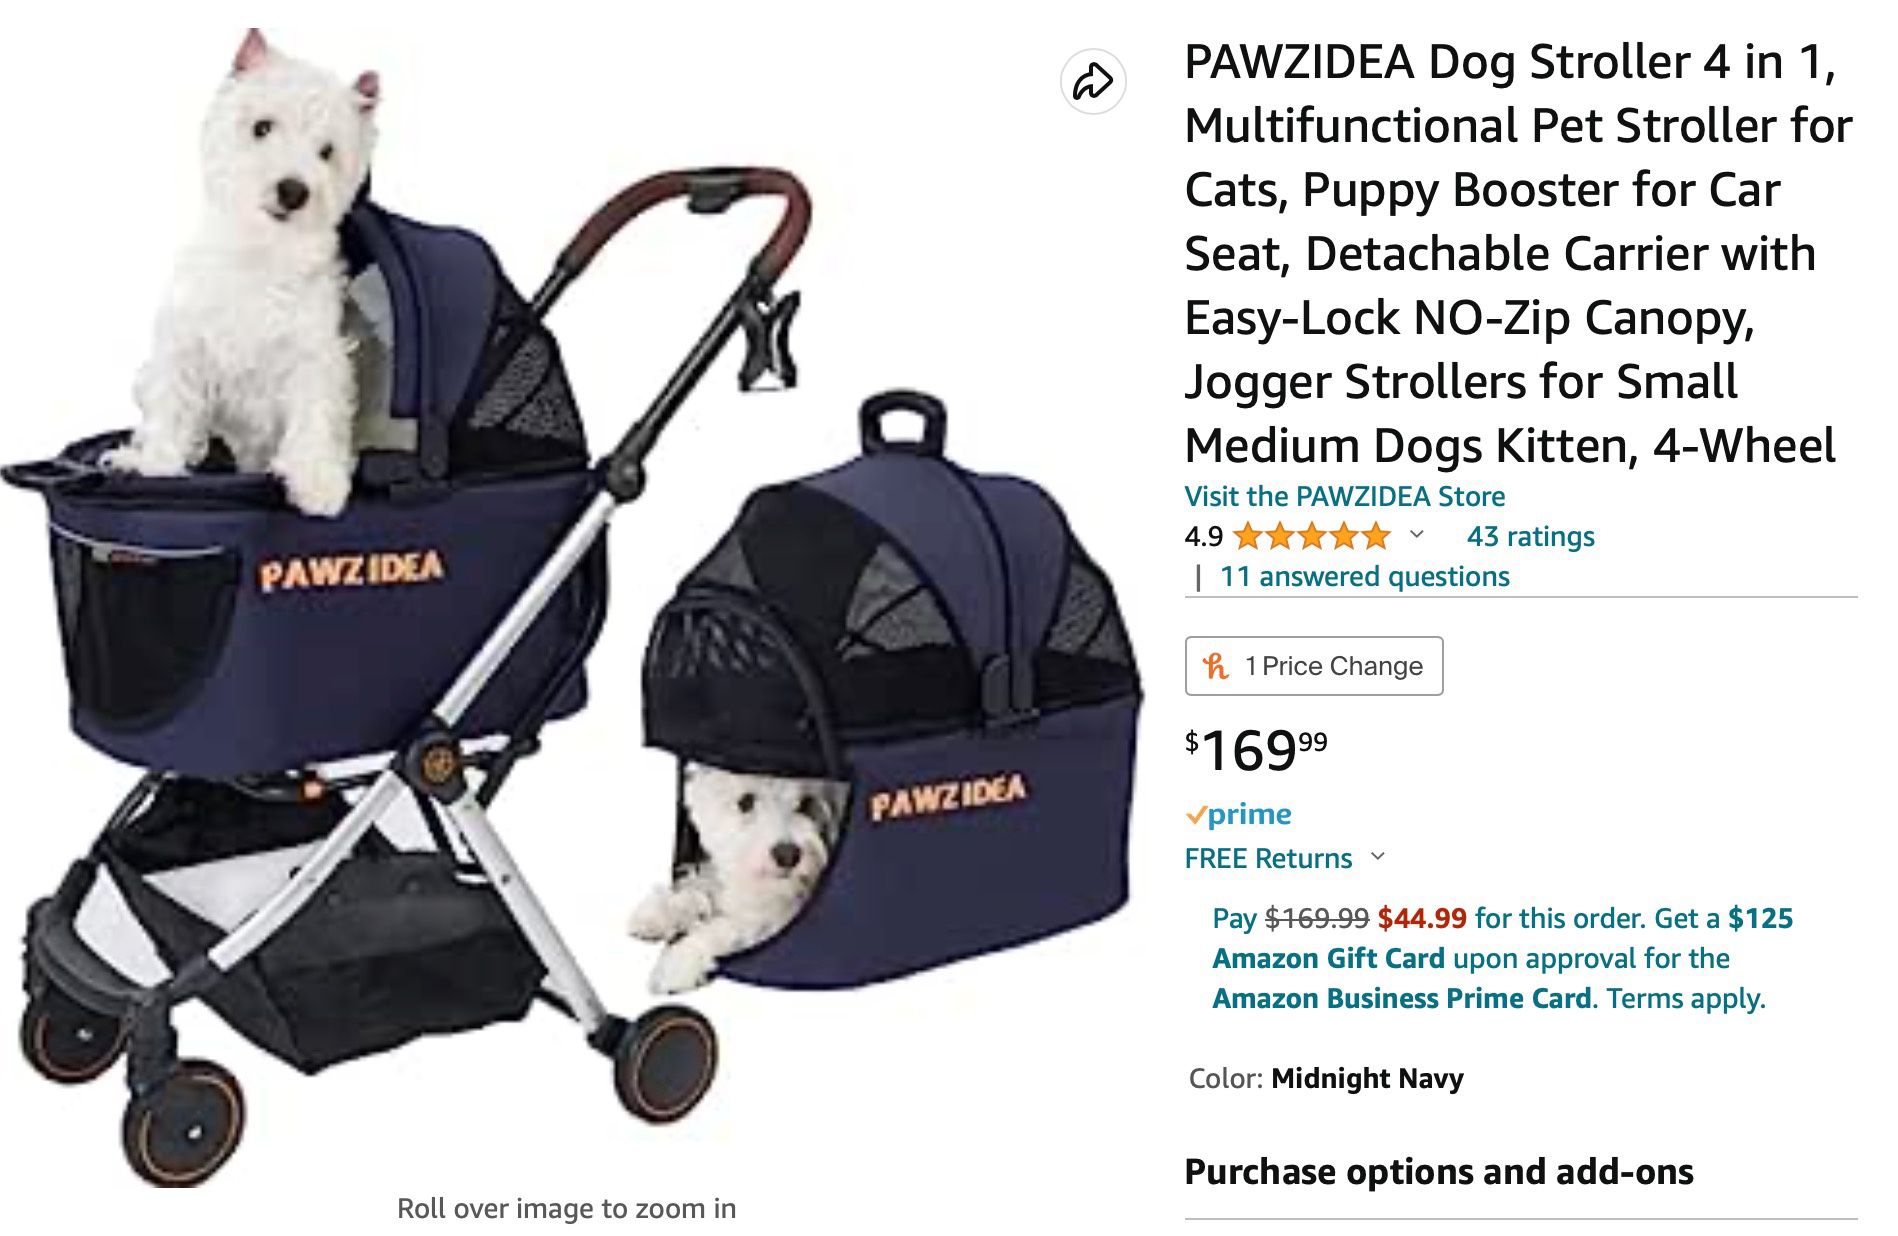 PAWZIDEA Pet Stroller 4 In 1, Cat/Dog Strollers For Small Medium Dogs, Detachable Travel Carrier W/Easy-Lock NO-Zip Canopy, Seatbelt Puppy Booster Car